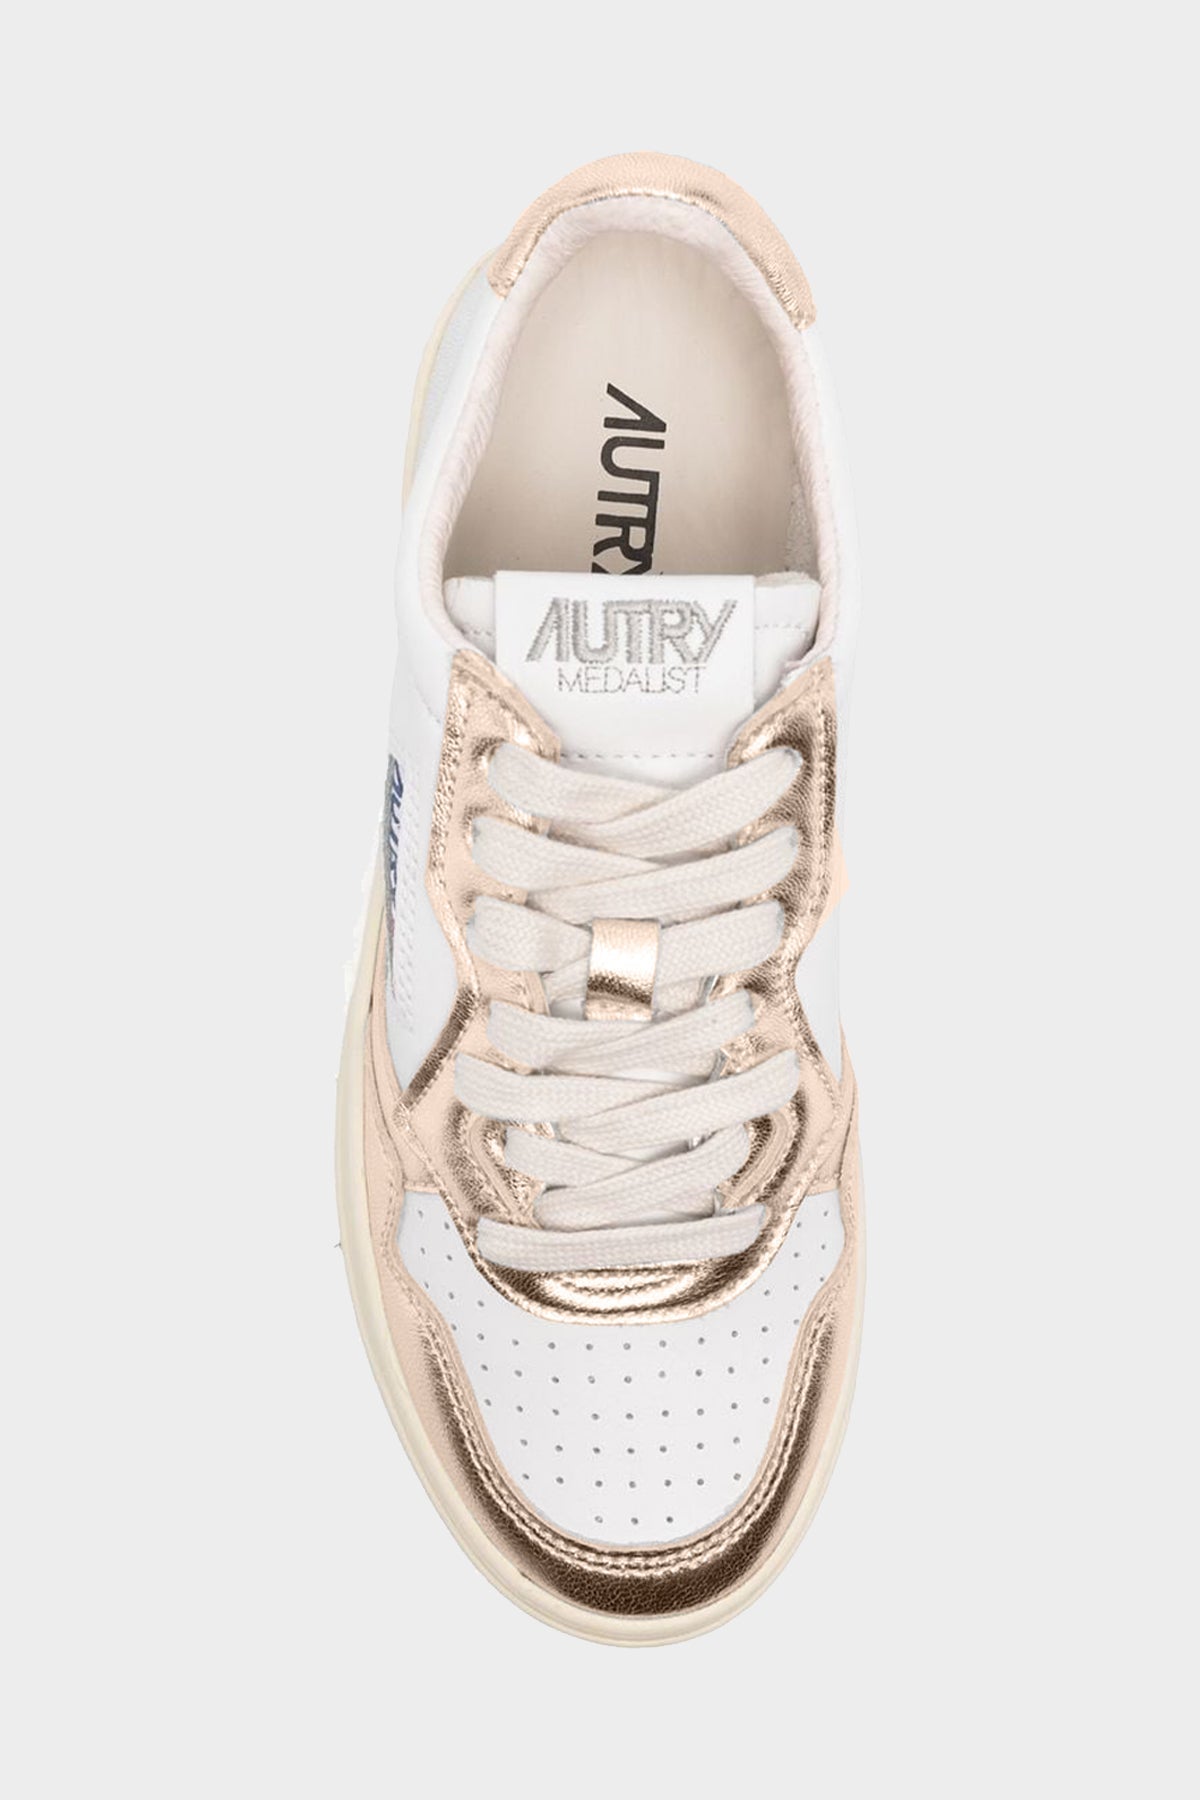 Two-Tone Medalist Low Leather Sneaker in White and Platinum - shop-olivia.com